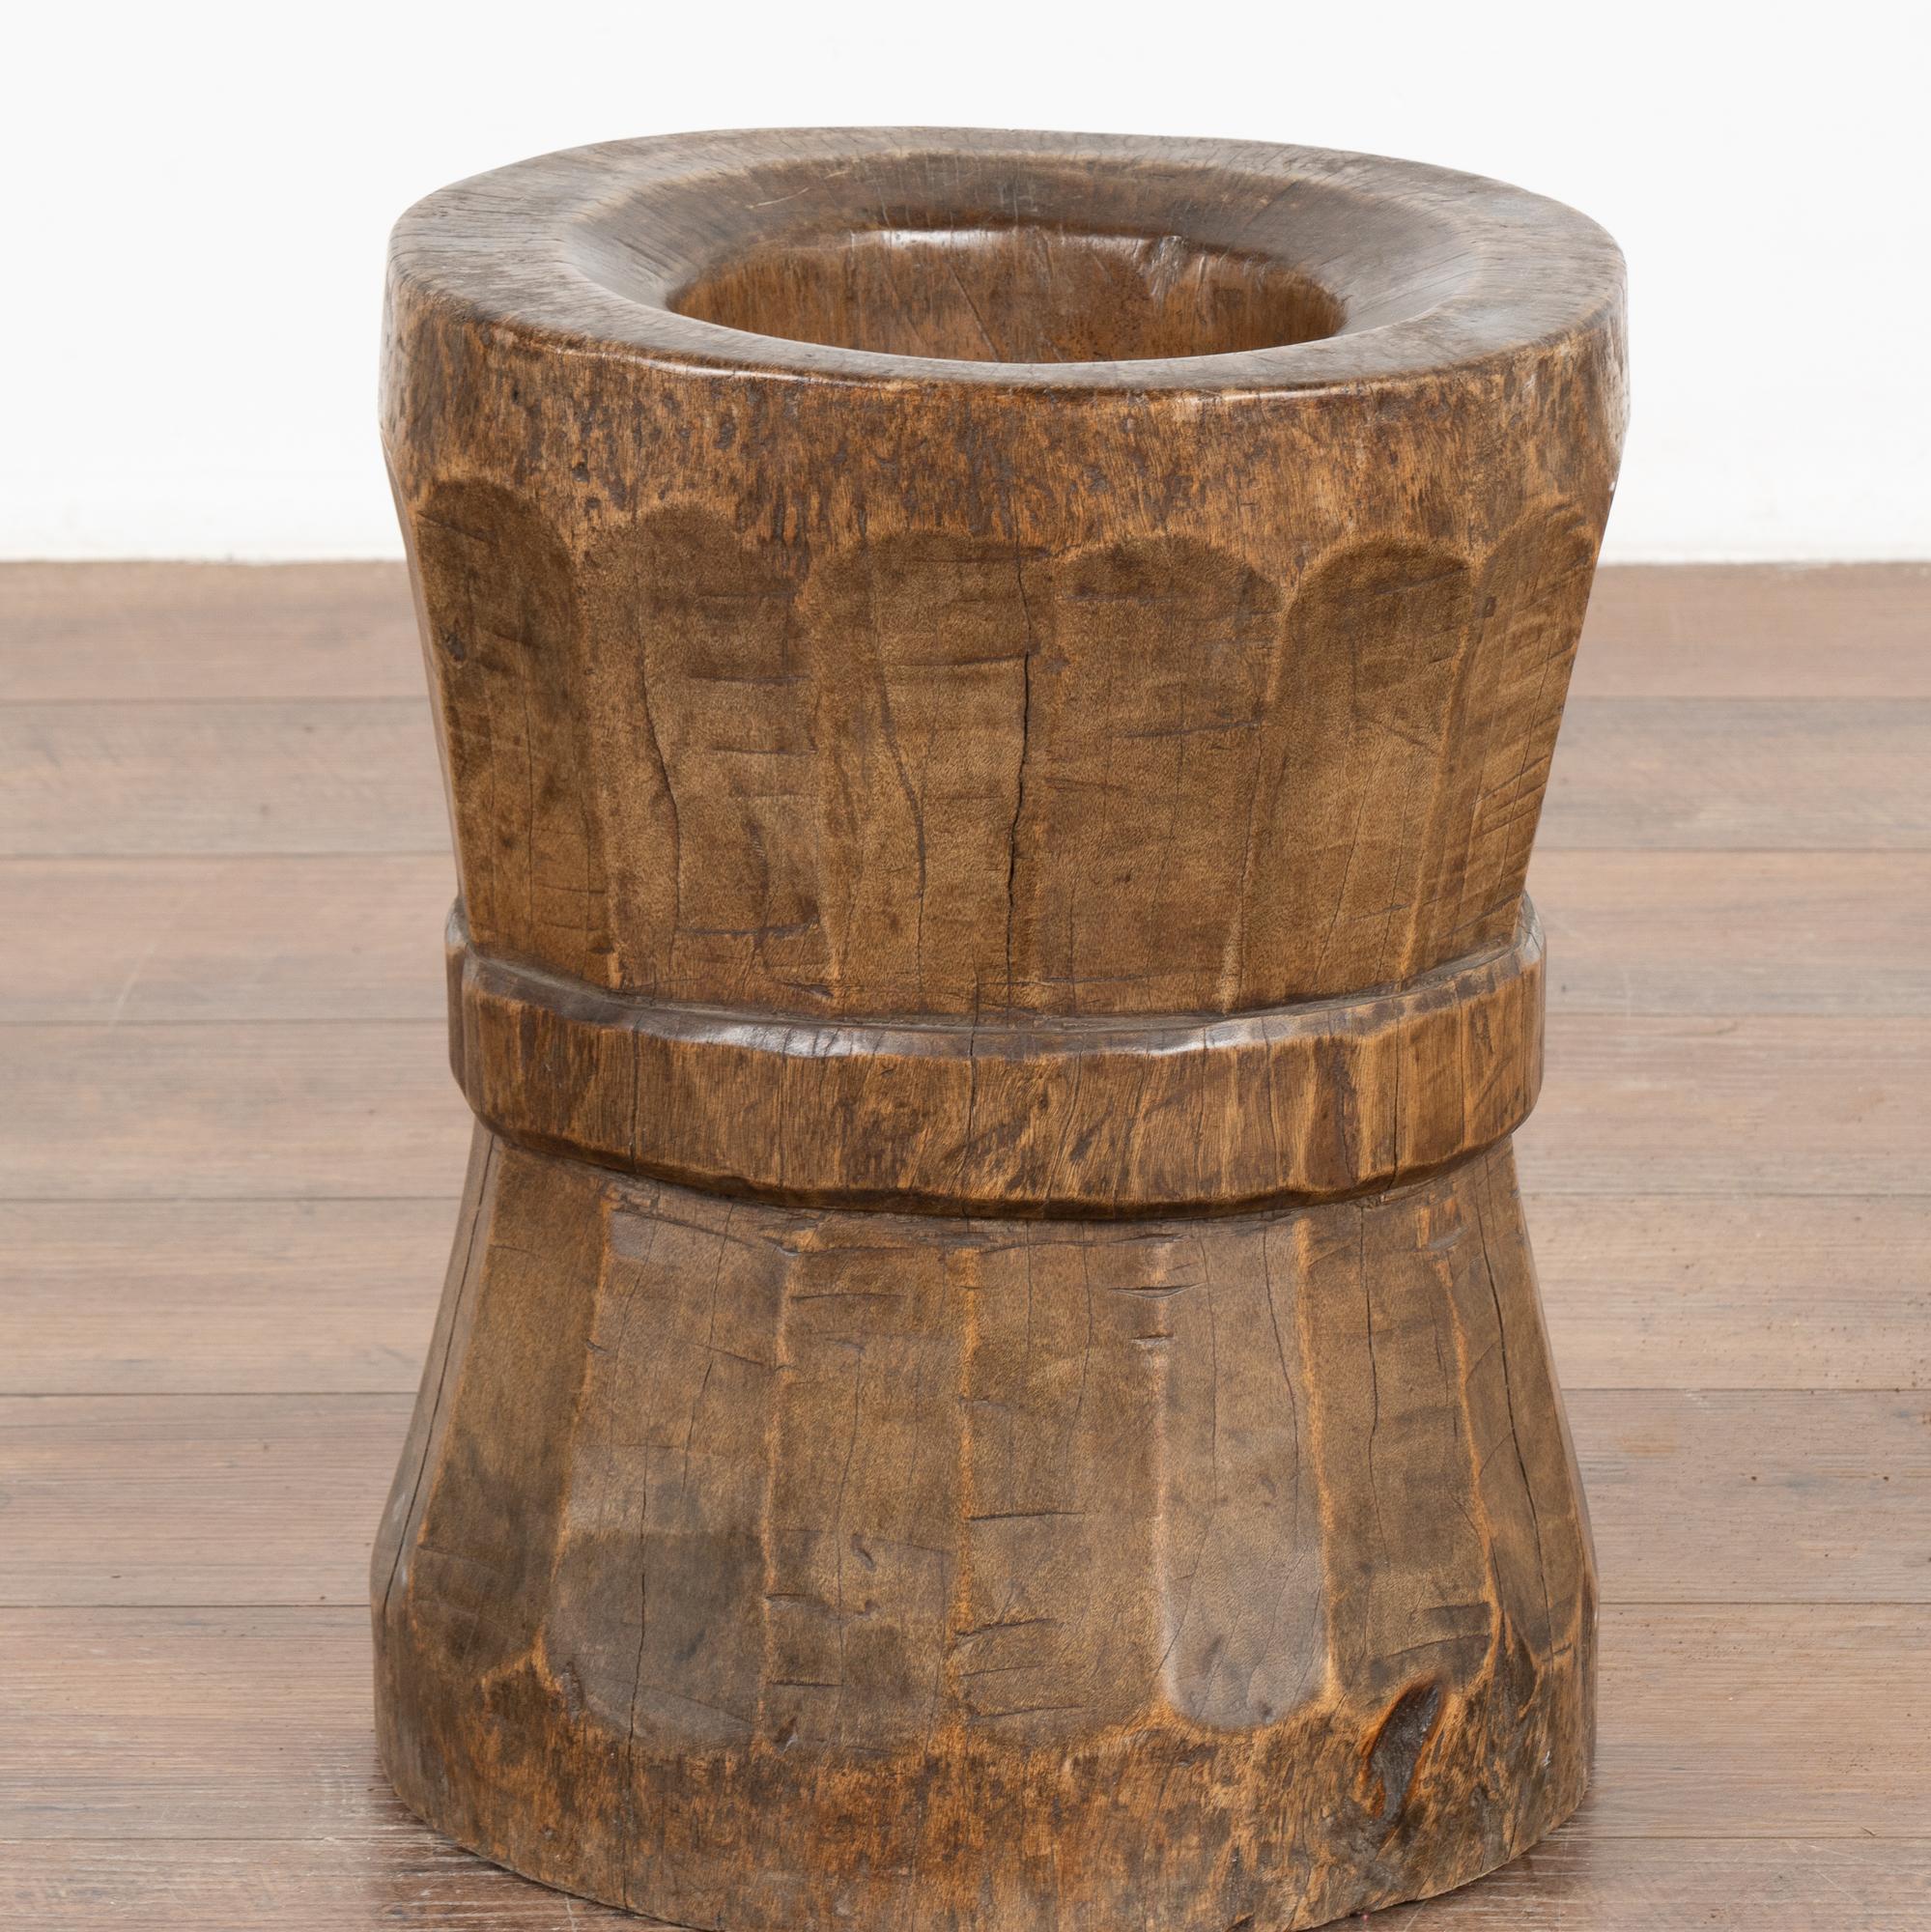 This wood accent piece originally served as a section of gear work from a water mill in China. The deep worn patina of the rich hard wood is warm and inviting. May be used as a container for display of dried arrangement or simply as a unique organic